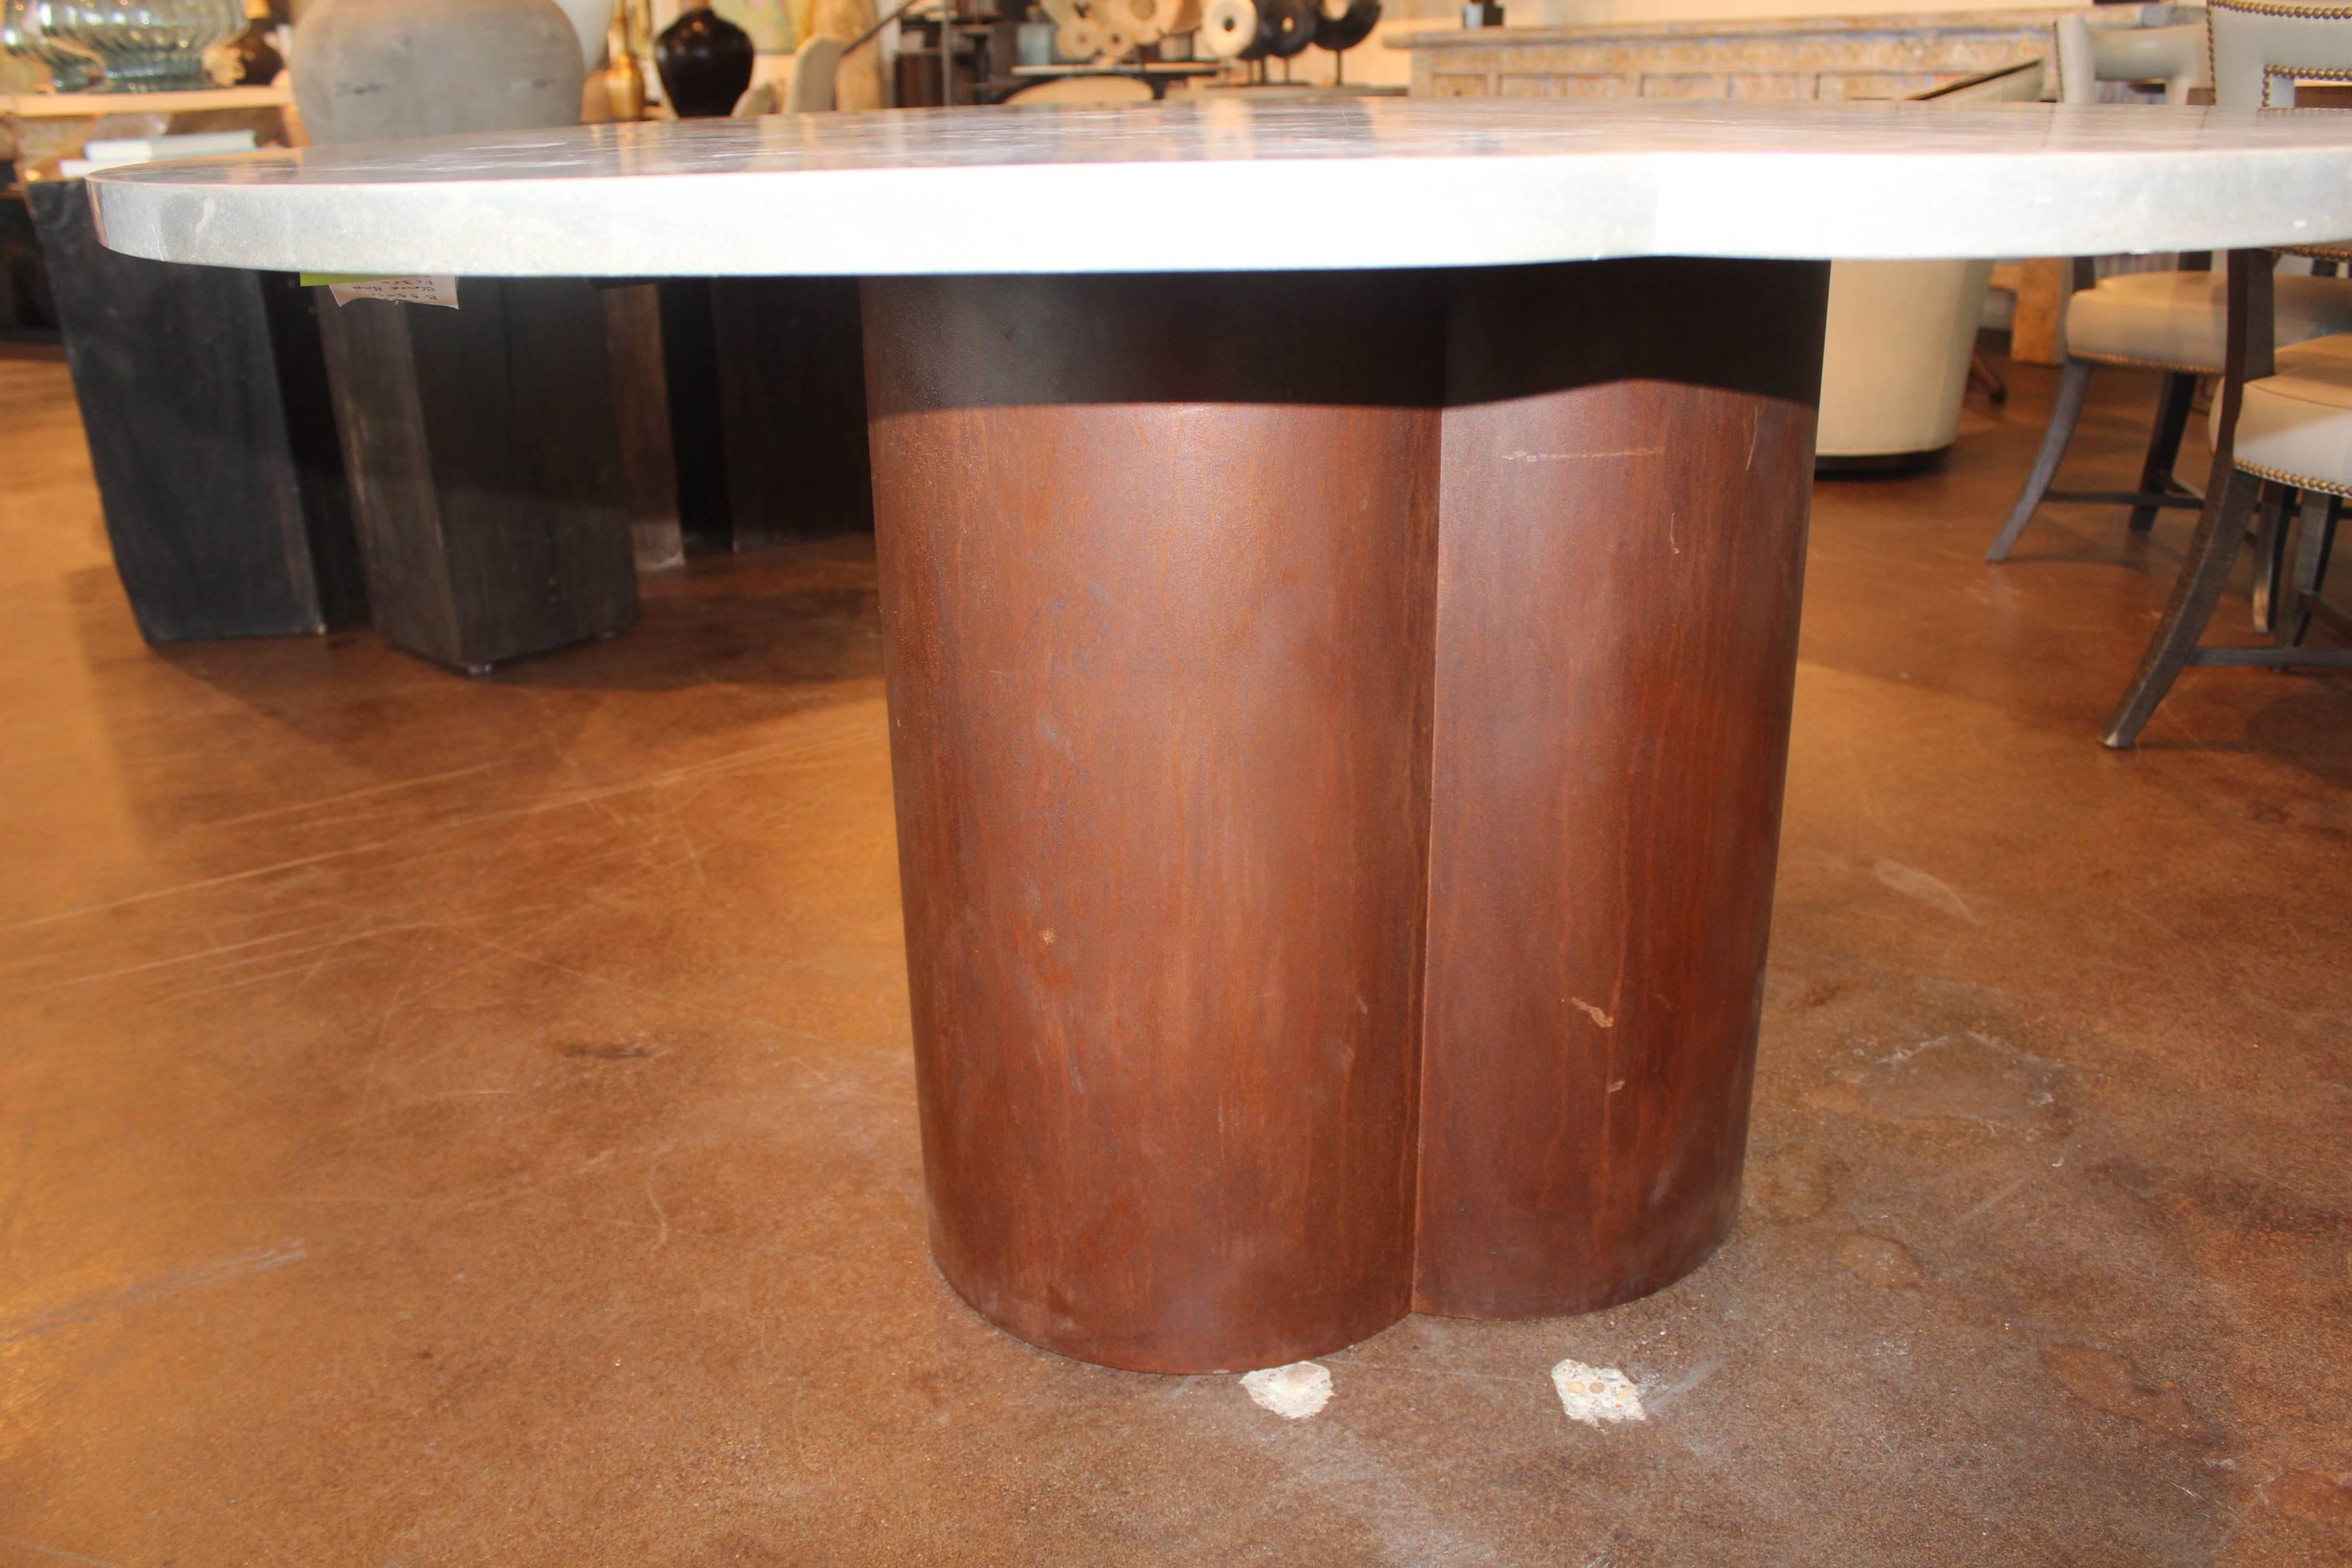 Modern Clover Shaped Italian Dining Table Base with Honed Lagos Azul Limestone Top